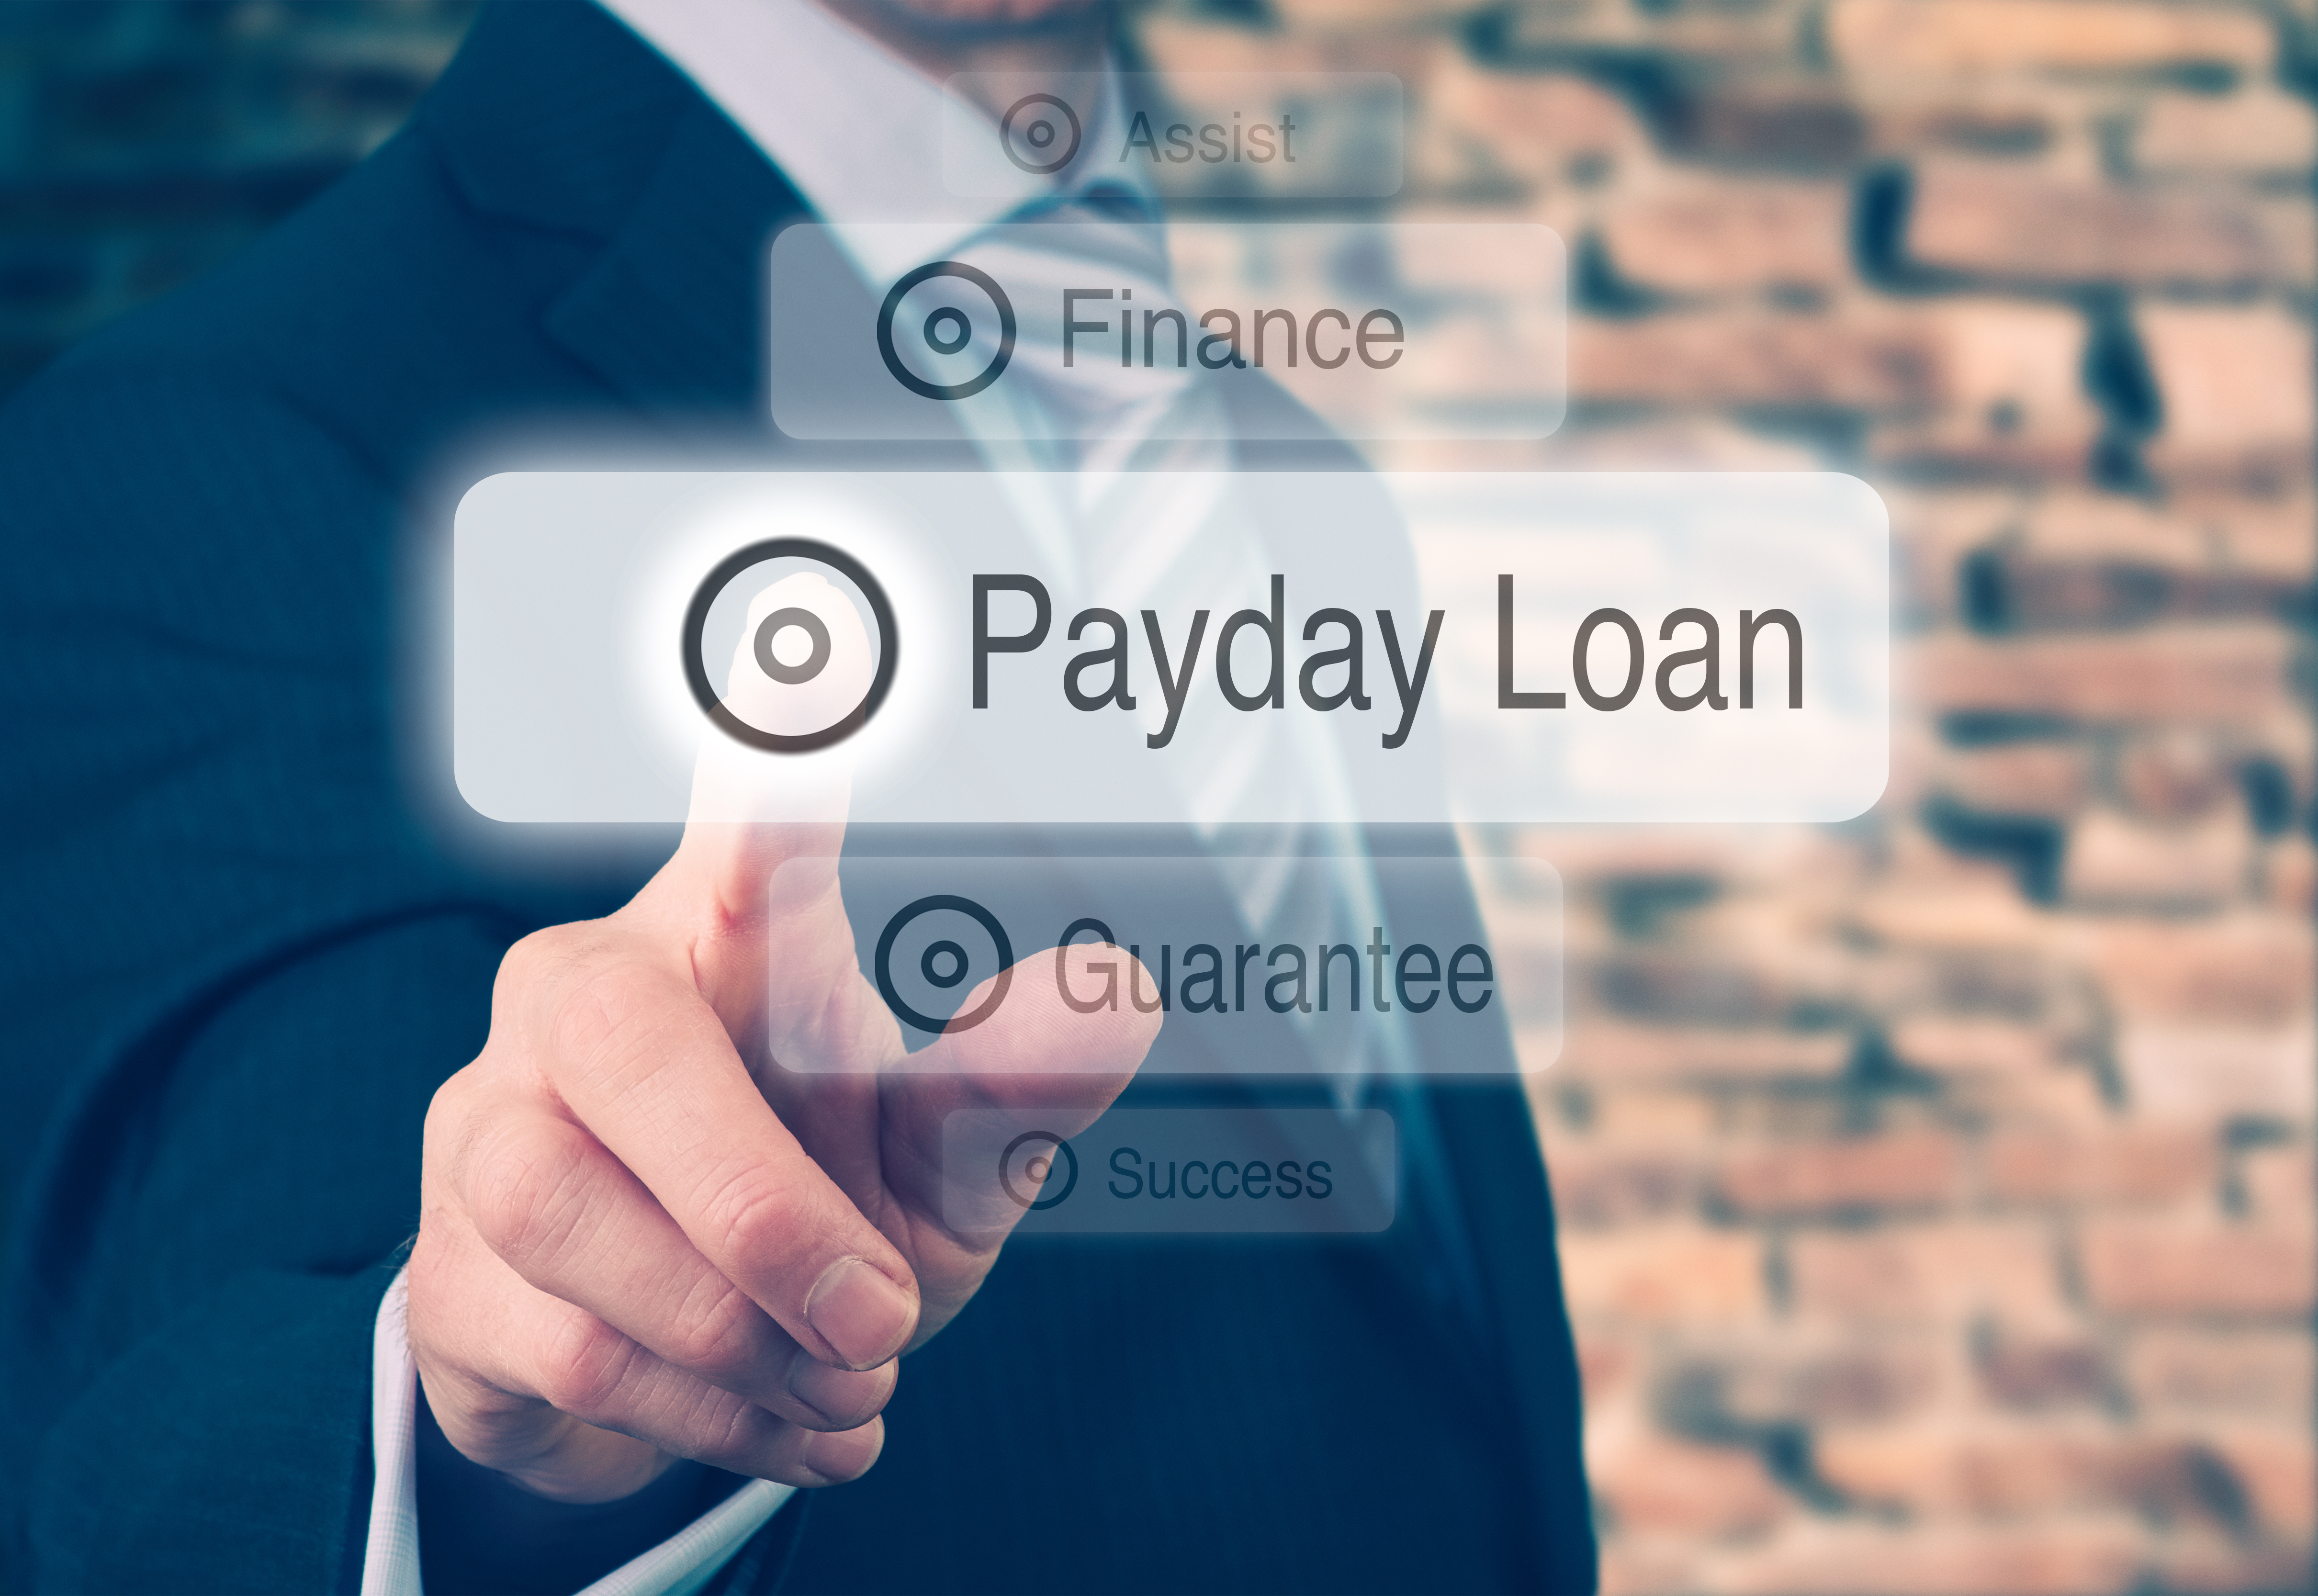 Top Reasons To Use The Same Payday Loan Provider For Future Loans